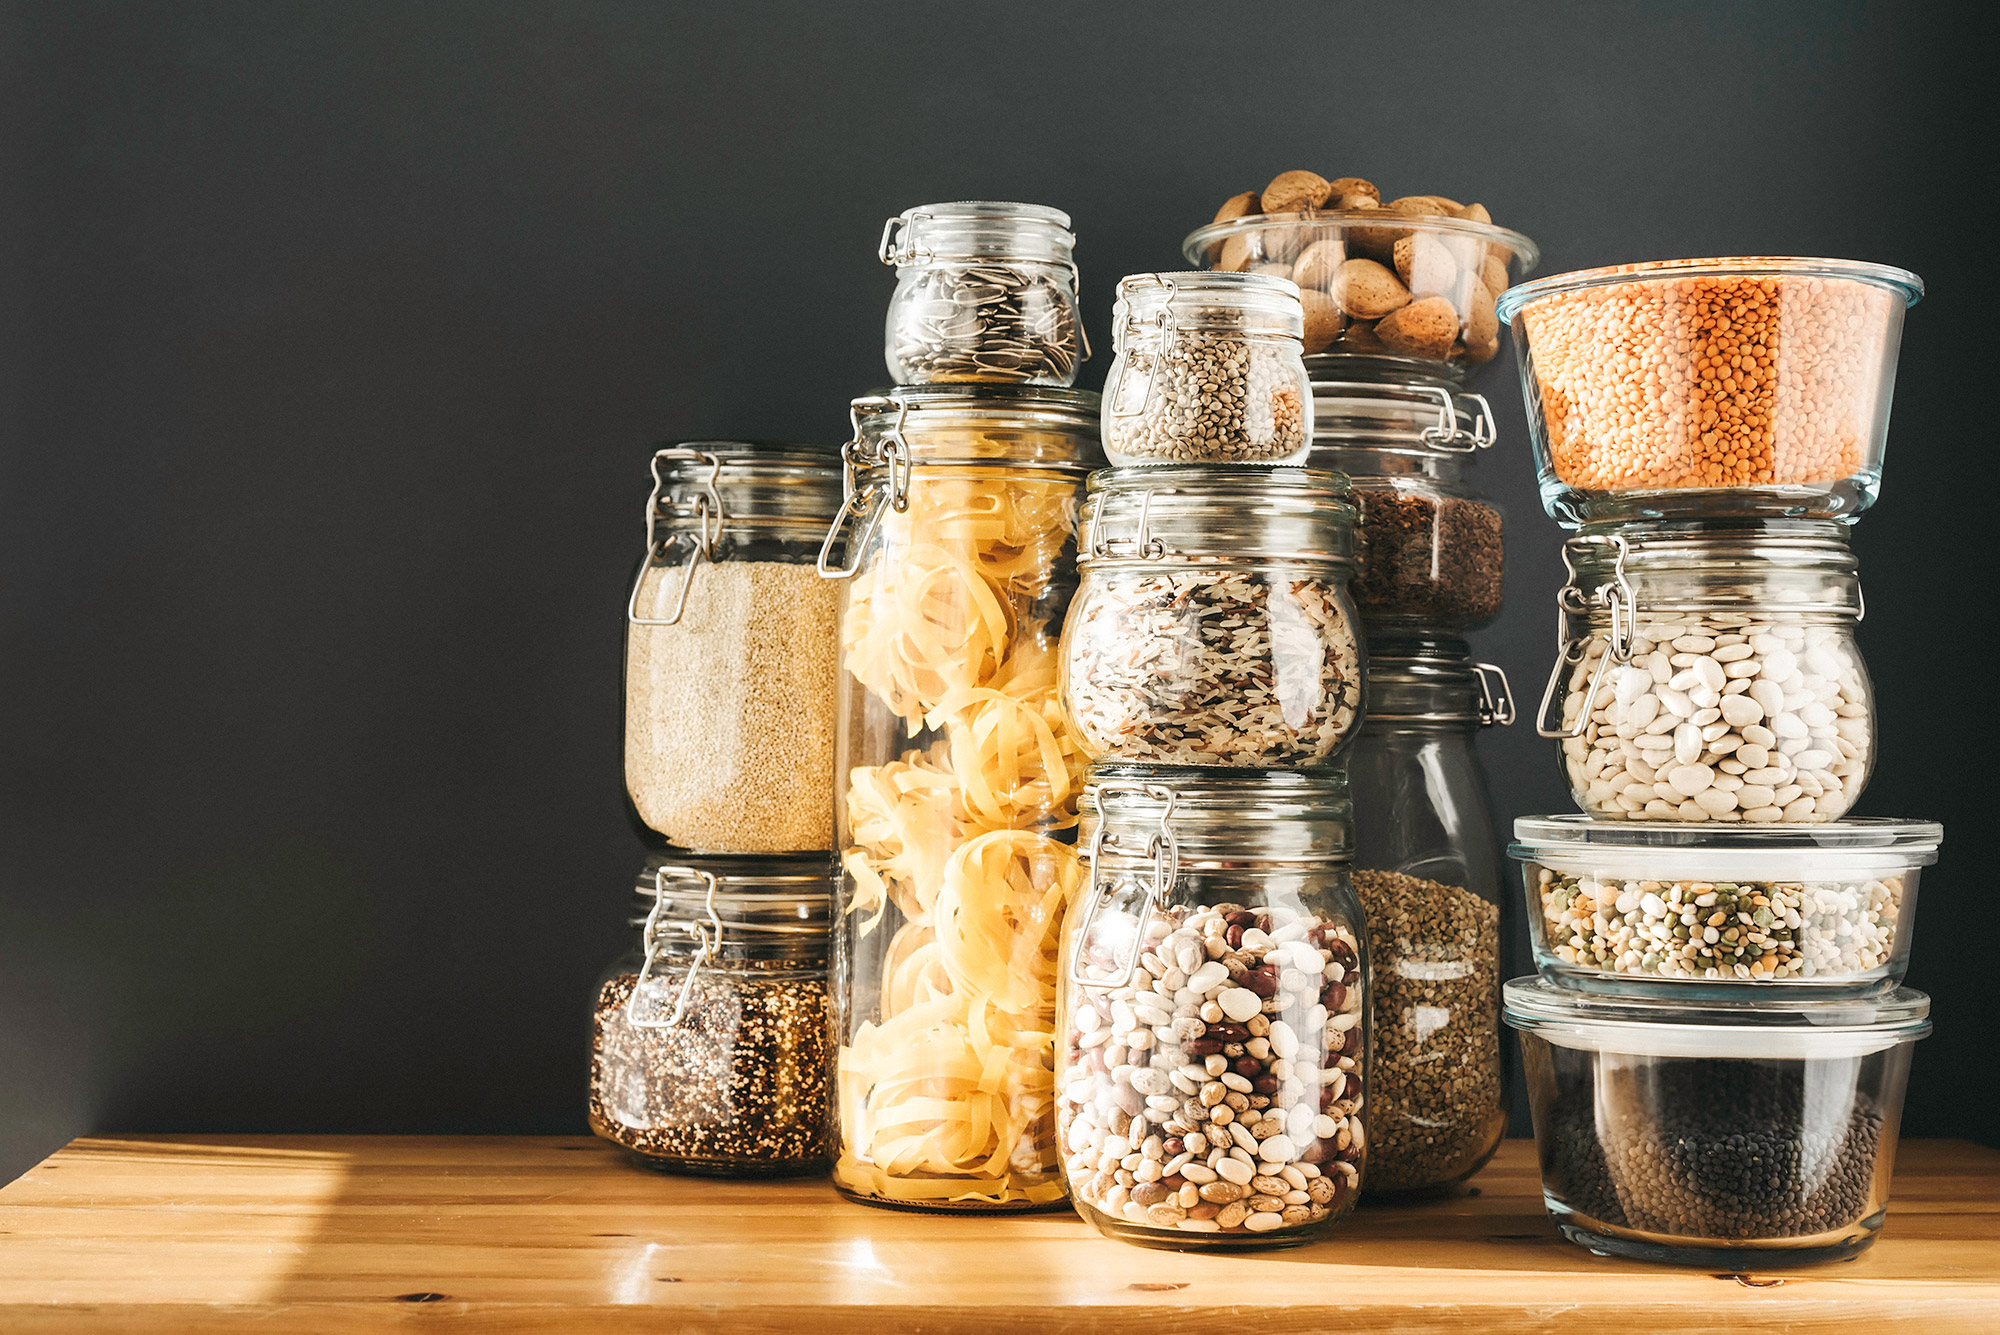 Jars of rice, beans, pasta, and other dry goods